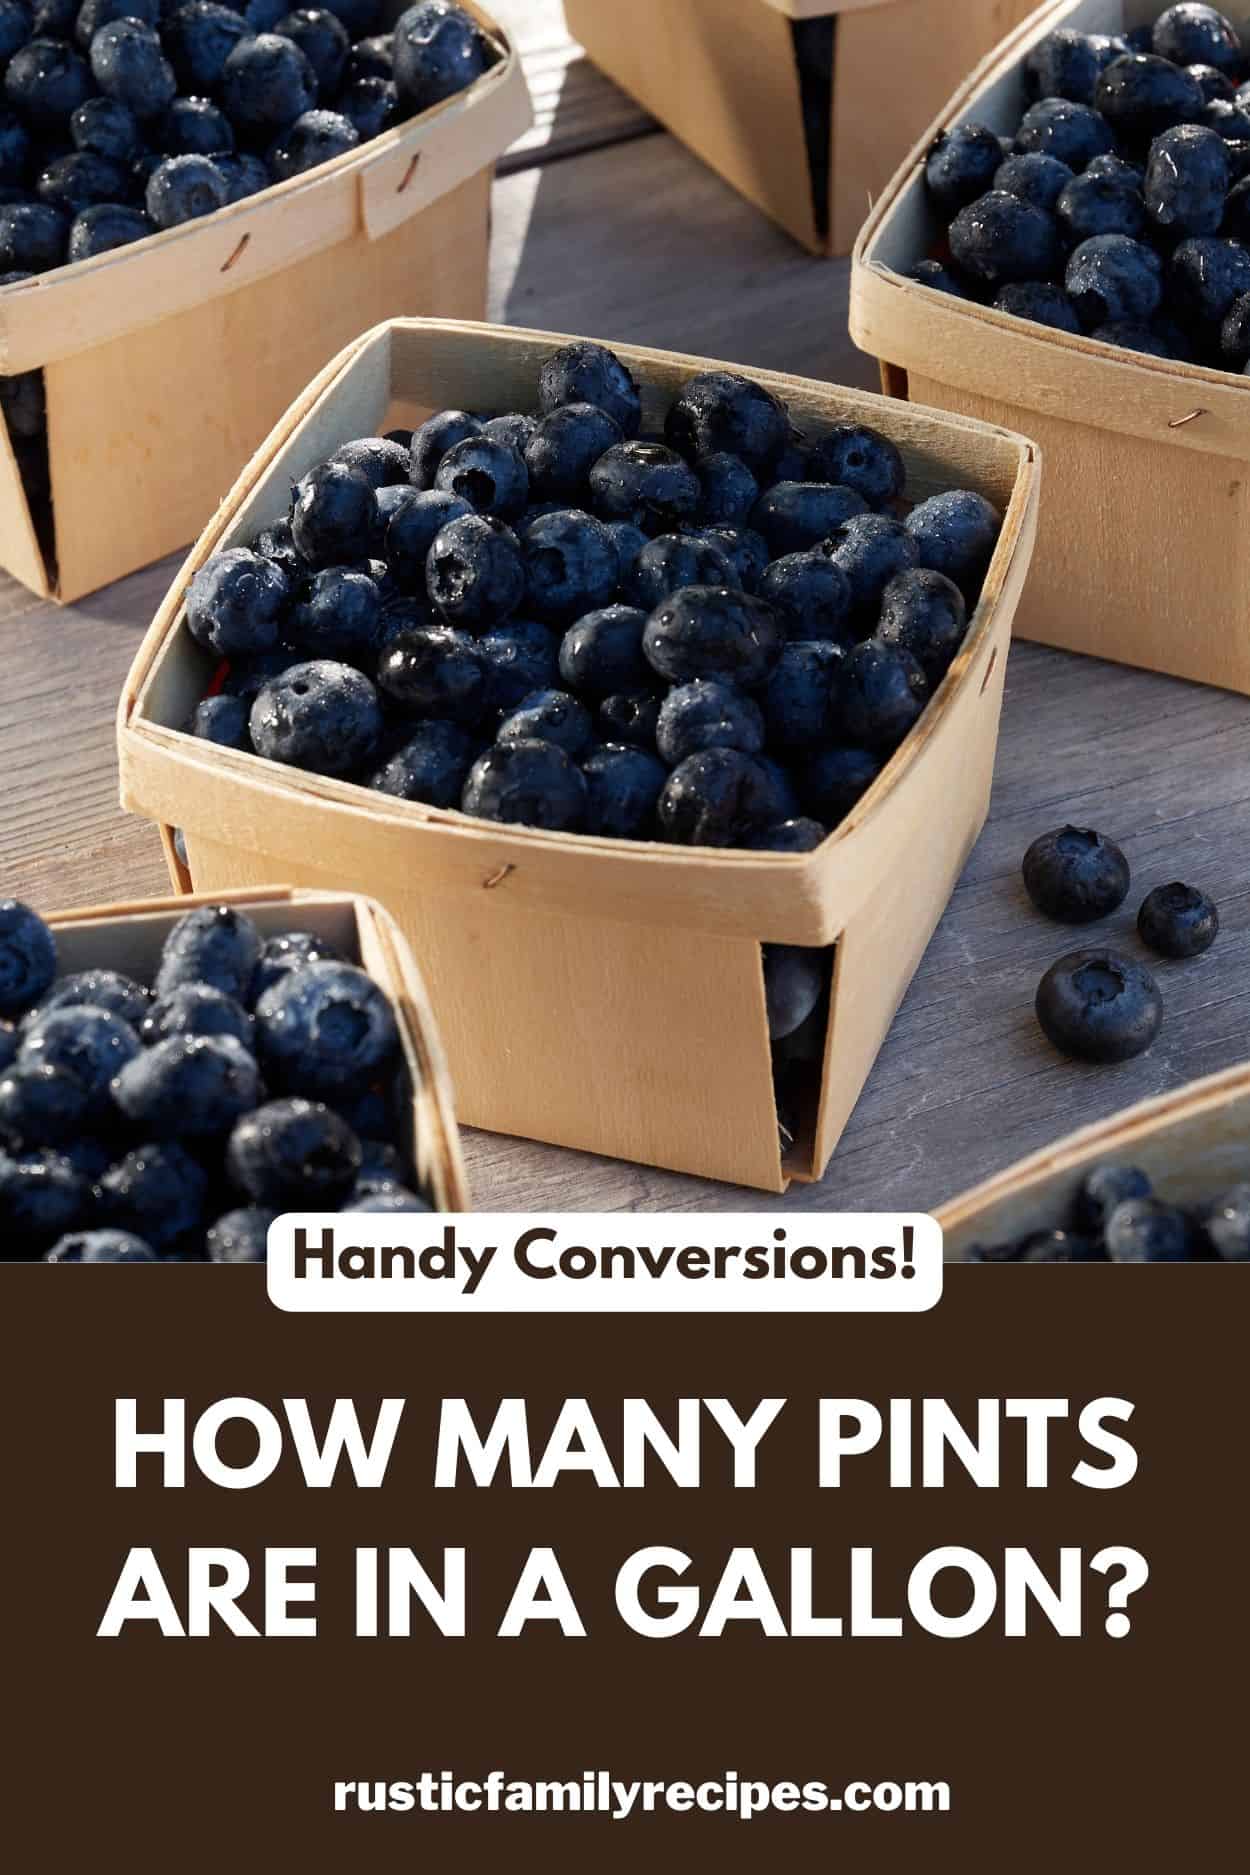 Pint containers of blueberries